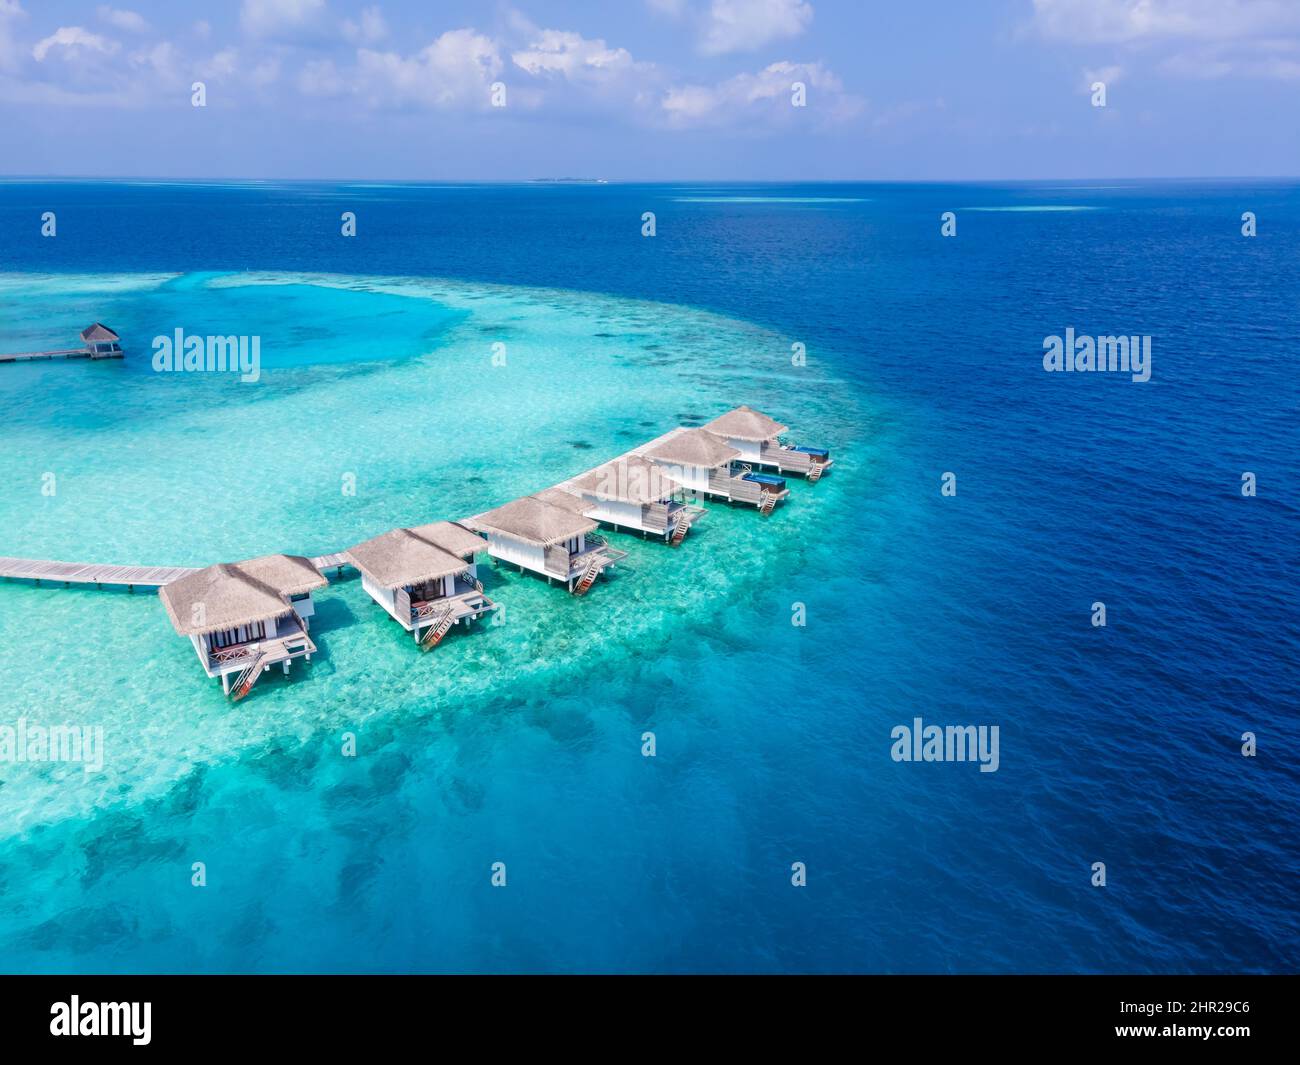 Overwater villas on tropical atoll island for holidays vacation travel and honeymoon. Luxury resort hotel in Maldives or Caribbean with turquoise sea Stock Photo